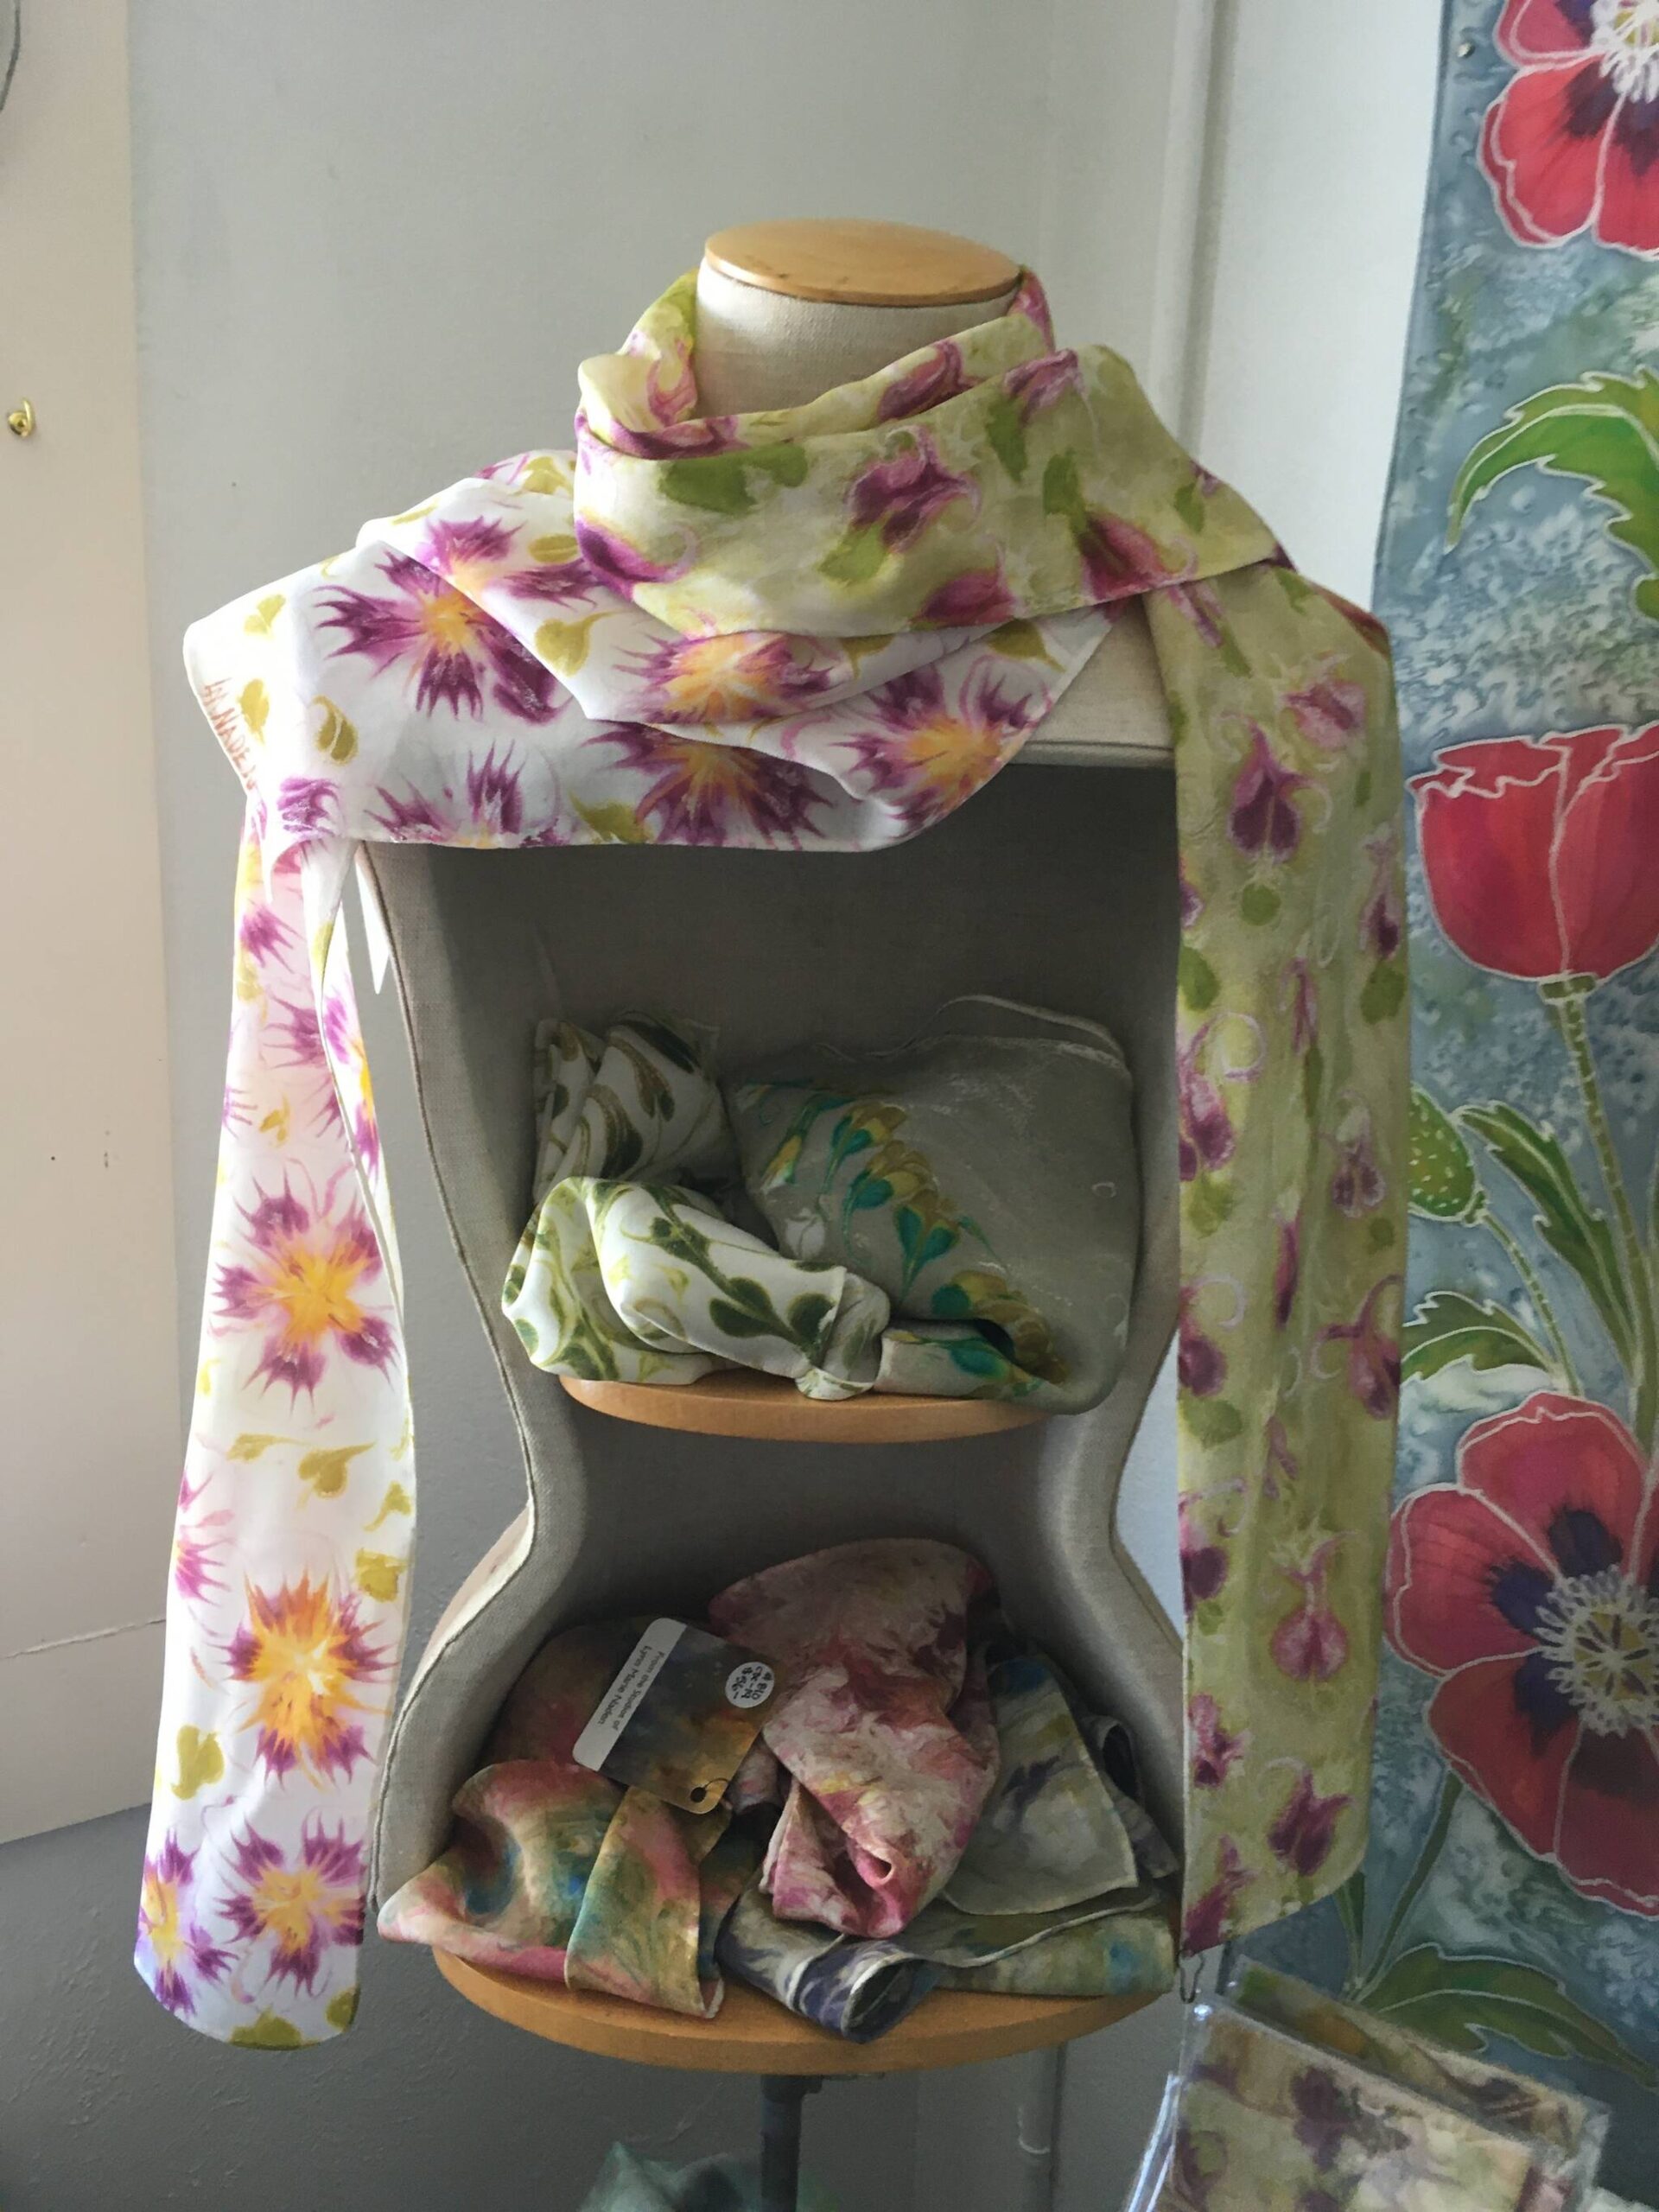 Haboti silk and silk crepe de chine scarves by Lynn Naden, who will be participating in Ready Set Art fundraiser for Ptarmigan Arts. (Photo courtesy Lynn Naden)